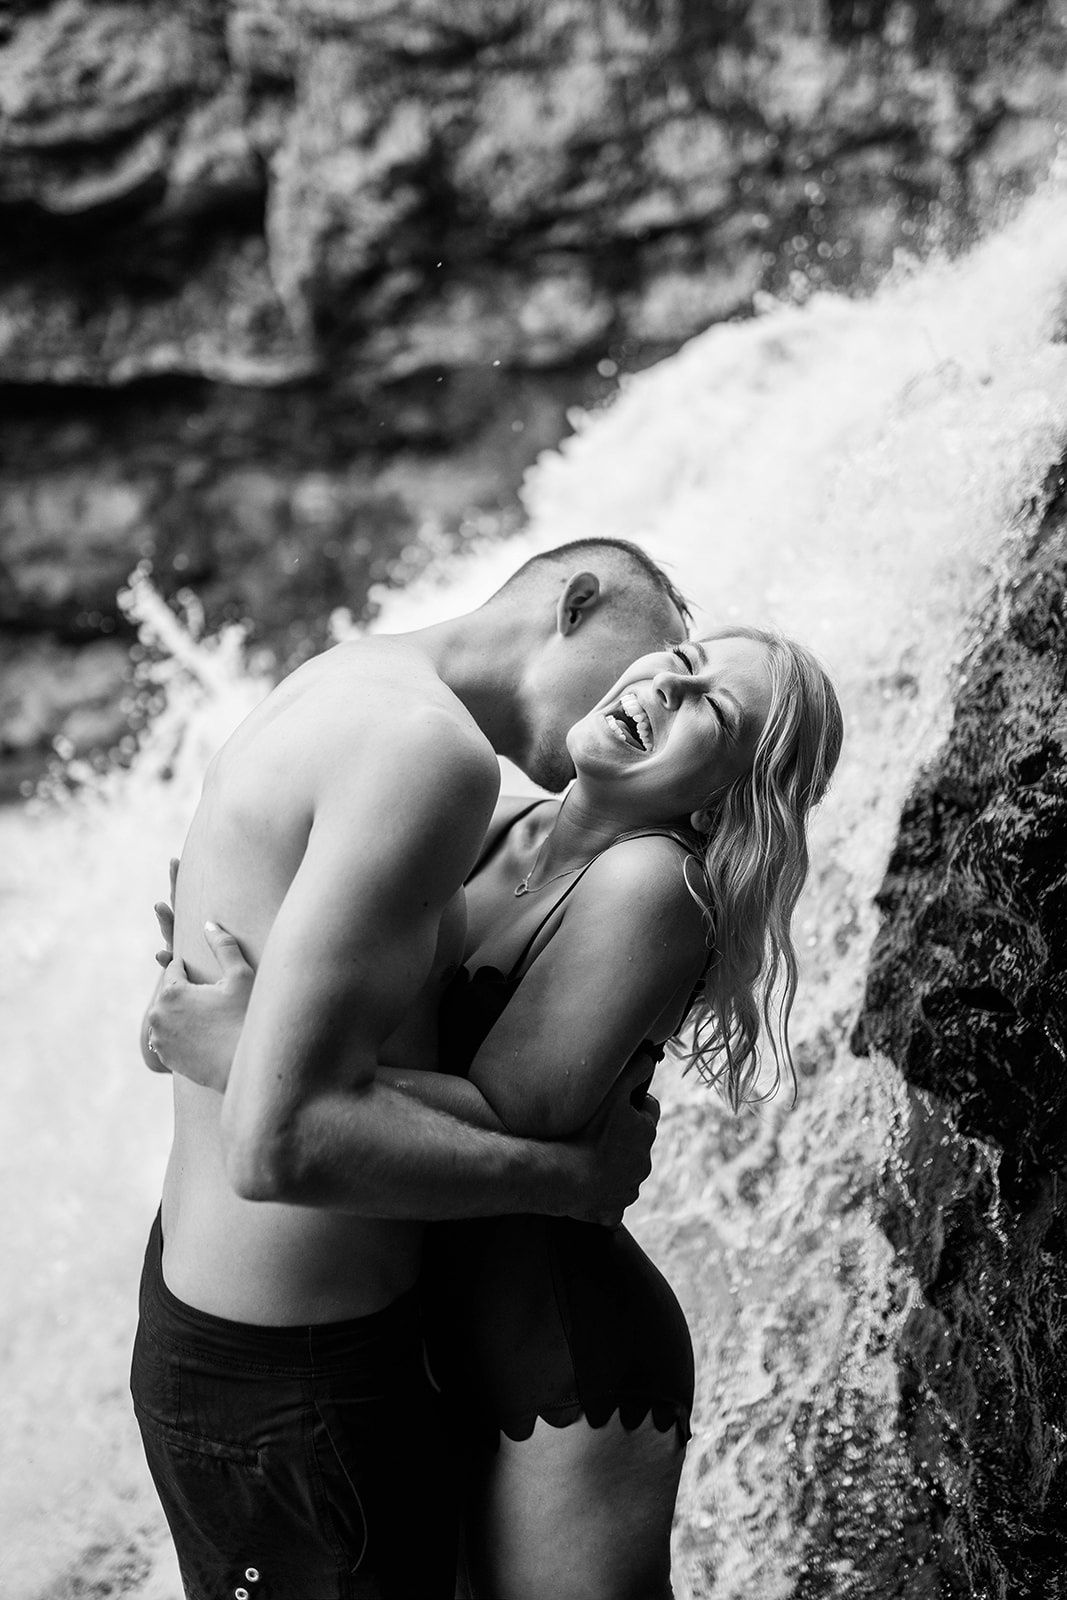 An engaged couples kiss under a waterfall as the water splashes around them.